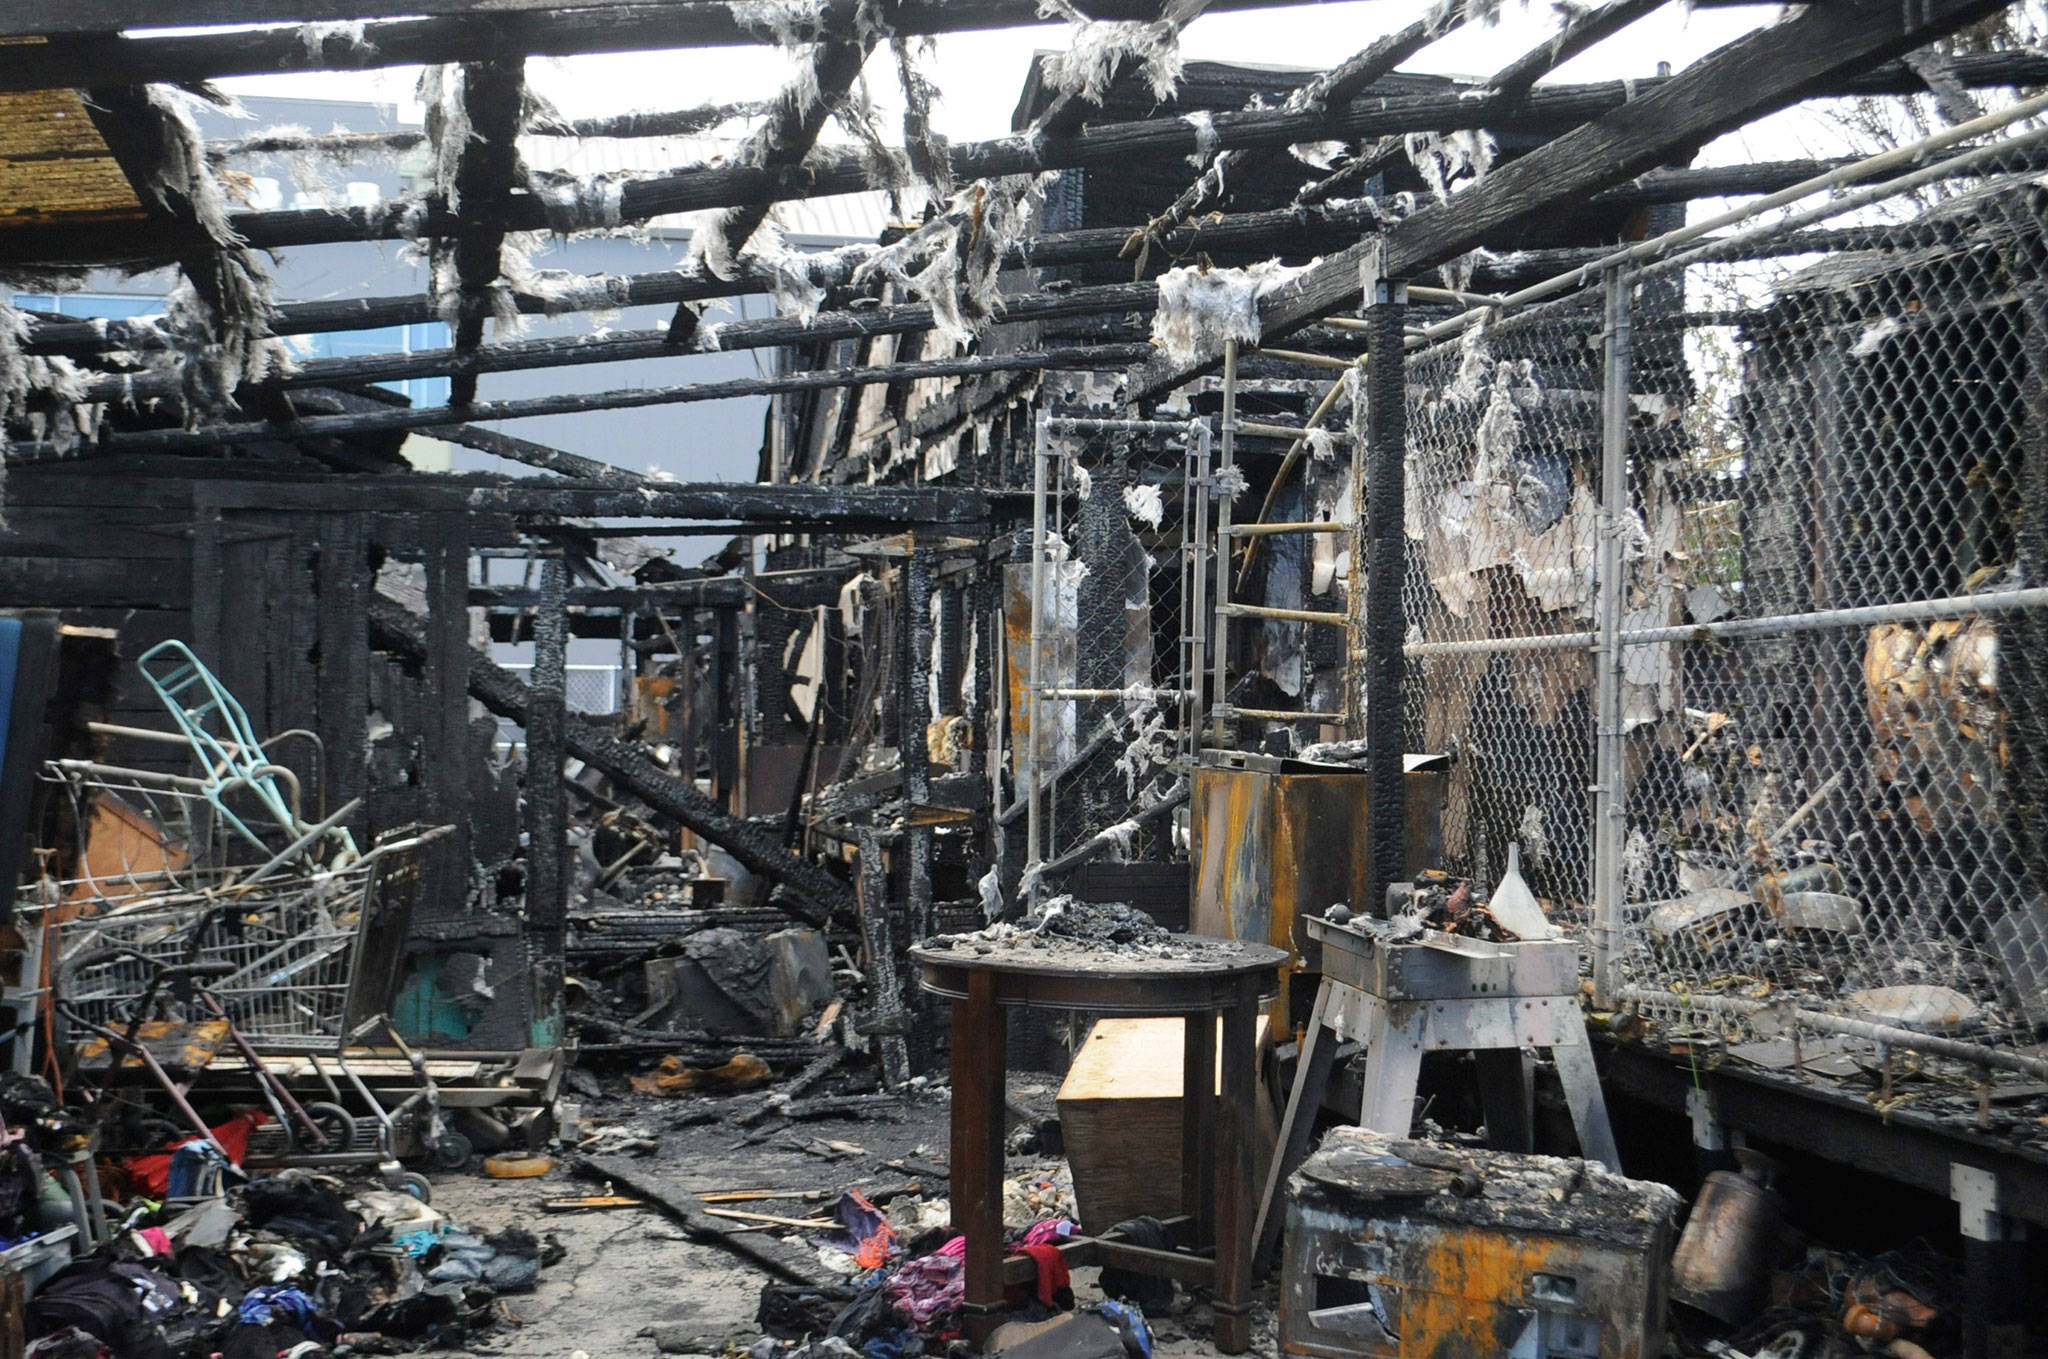 Sequim Police ruled the cause of a June 6 fire that destroyed a home, dental lab, garage and trailer inconclusive. All the structures were ruled uninhabitable. Sequim Gazette file photo by Matthew Nash